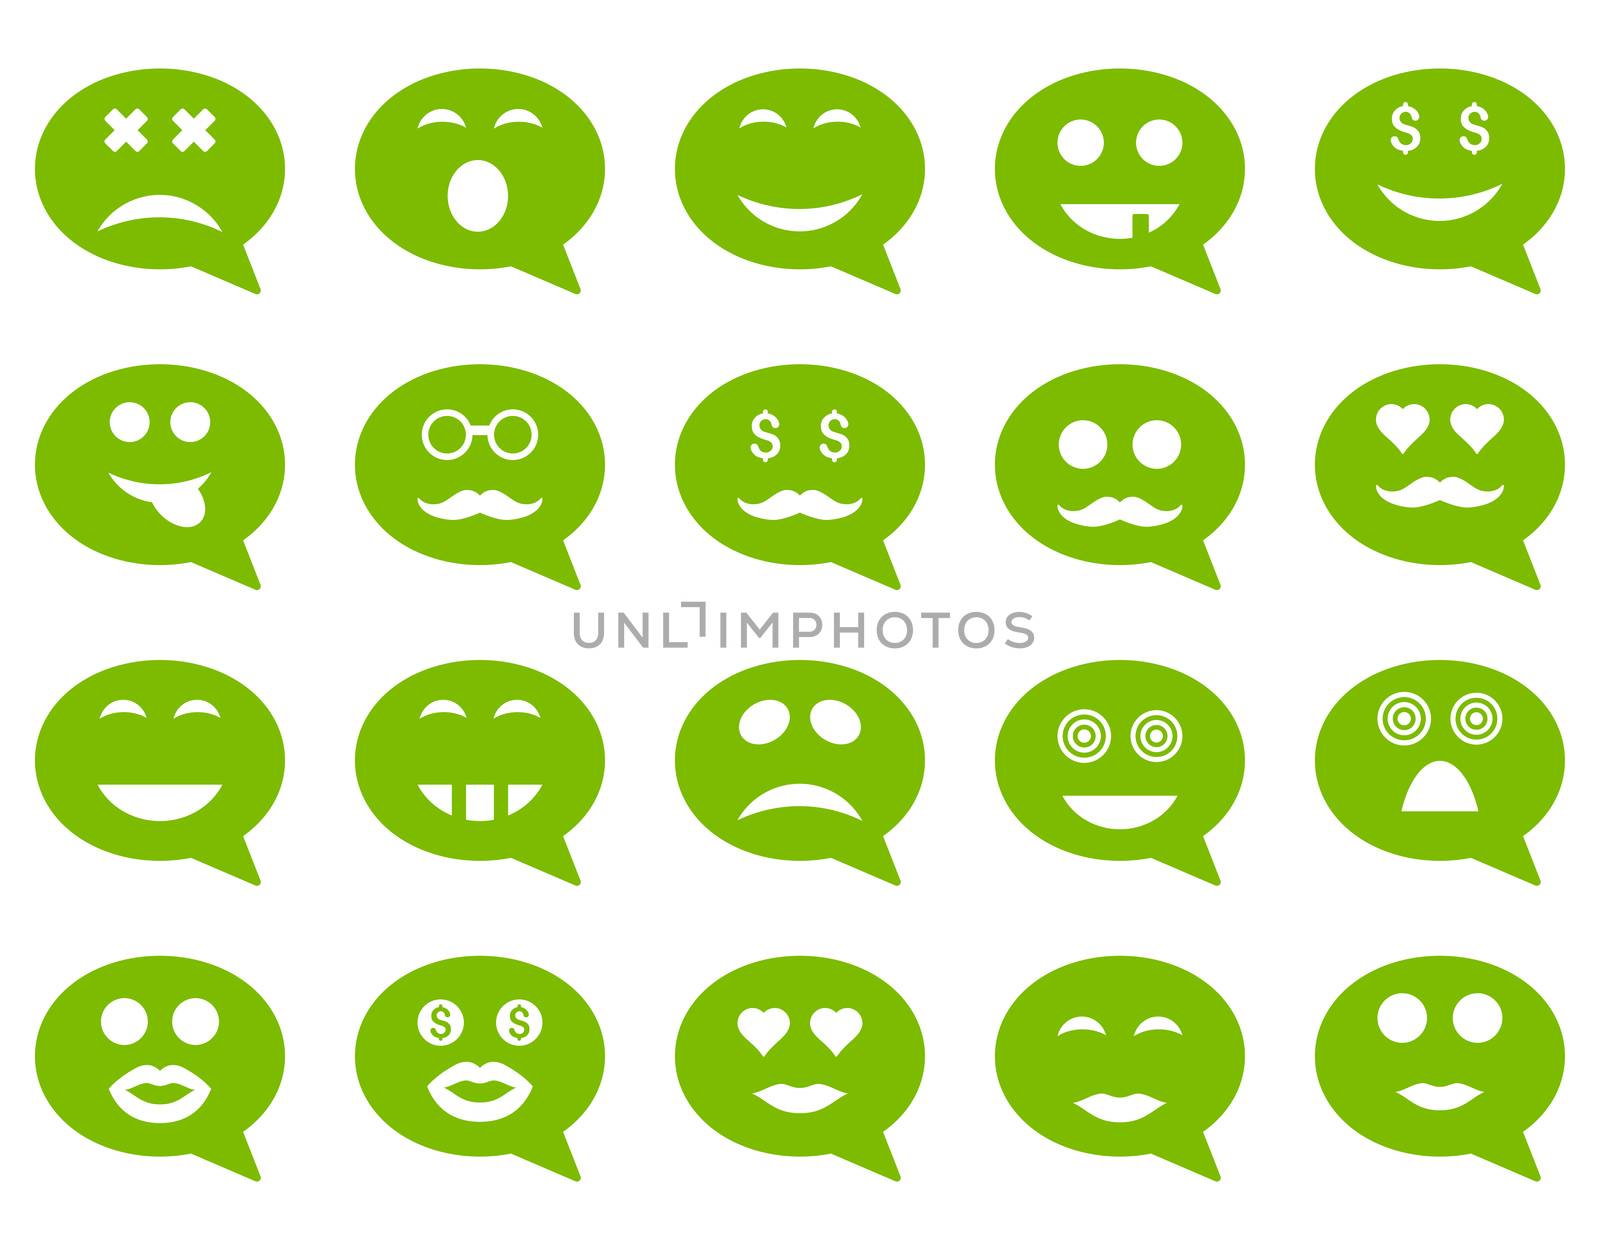 Chat emotion smile icons. Glyph set style is flat images, eco green symbols, isolated on a white background.